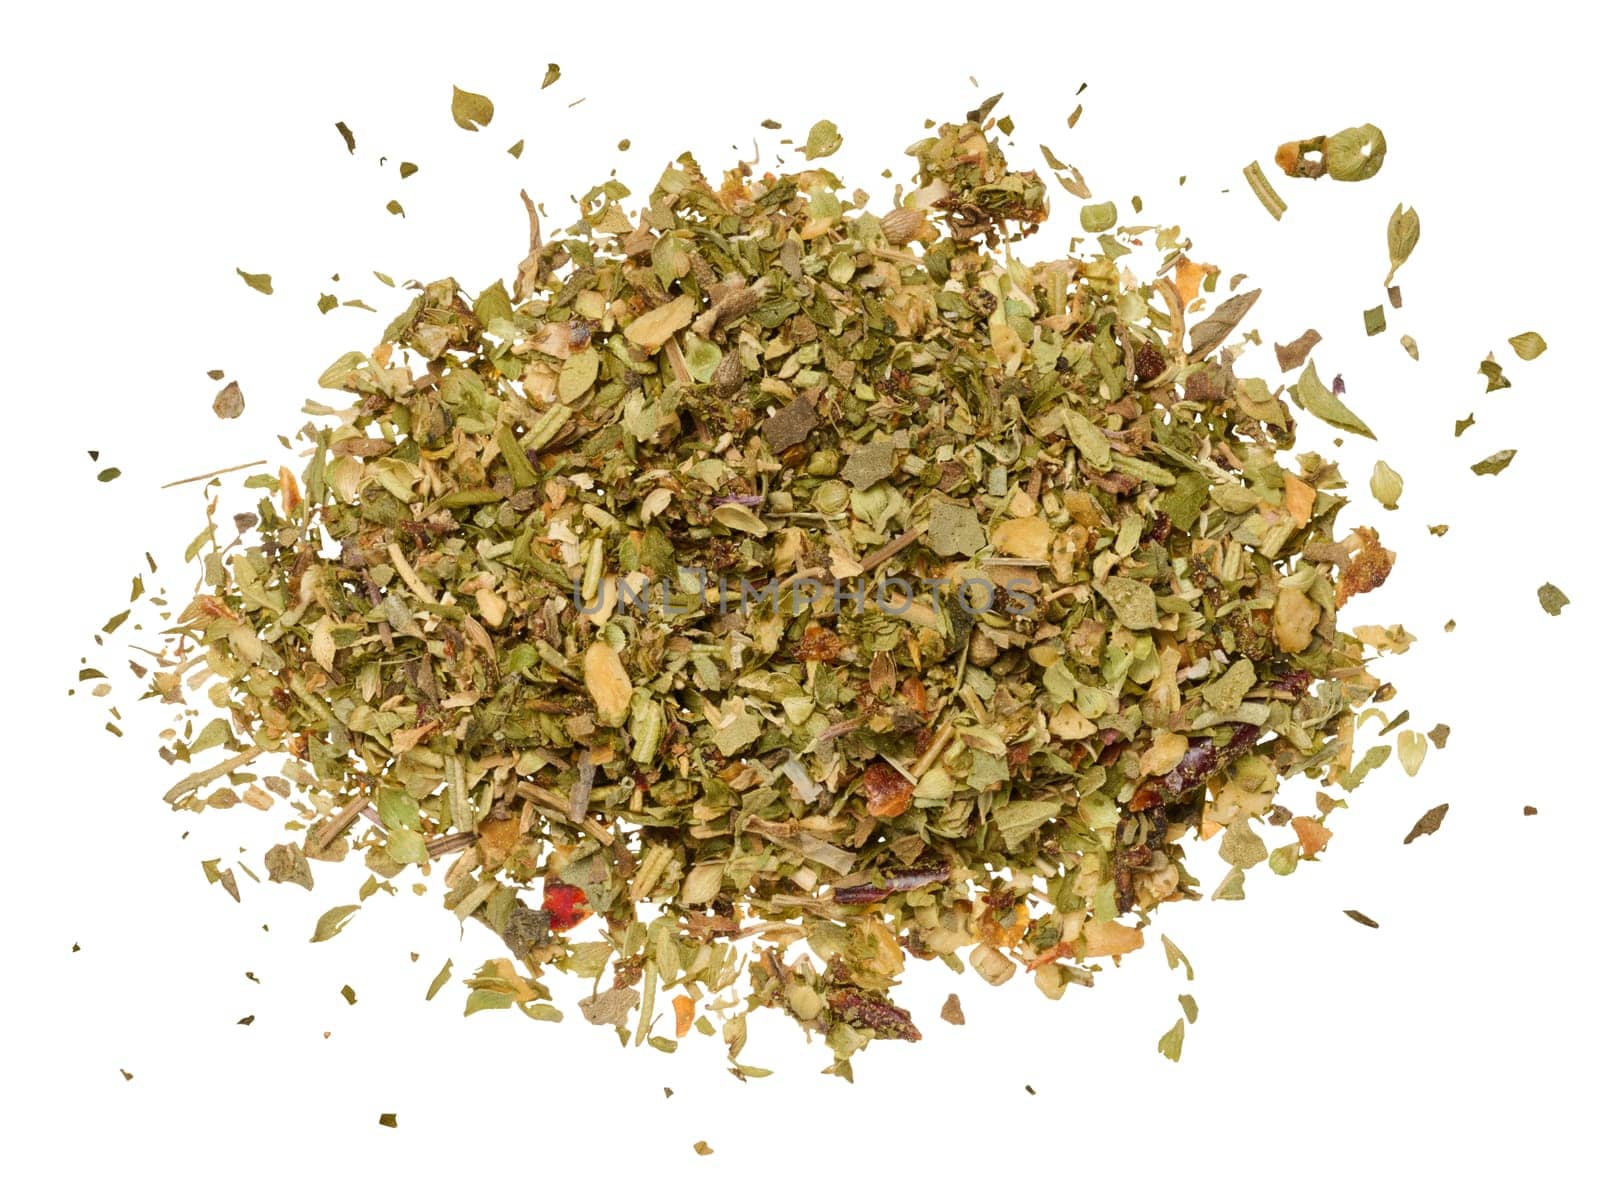 Chopped dry leaves of basil, parsley, dill and sun dried tomatoes on an isolated background. View from above